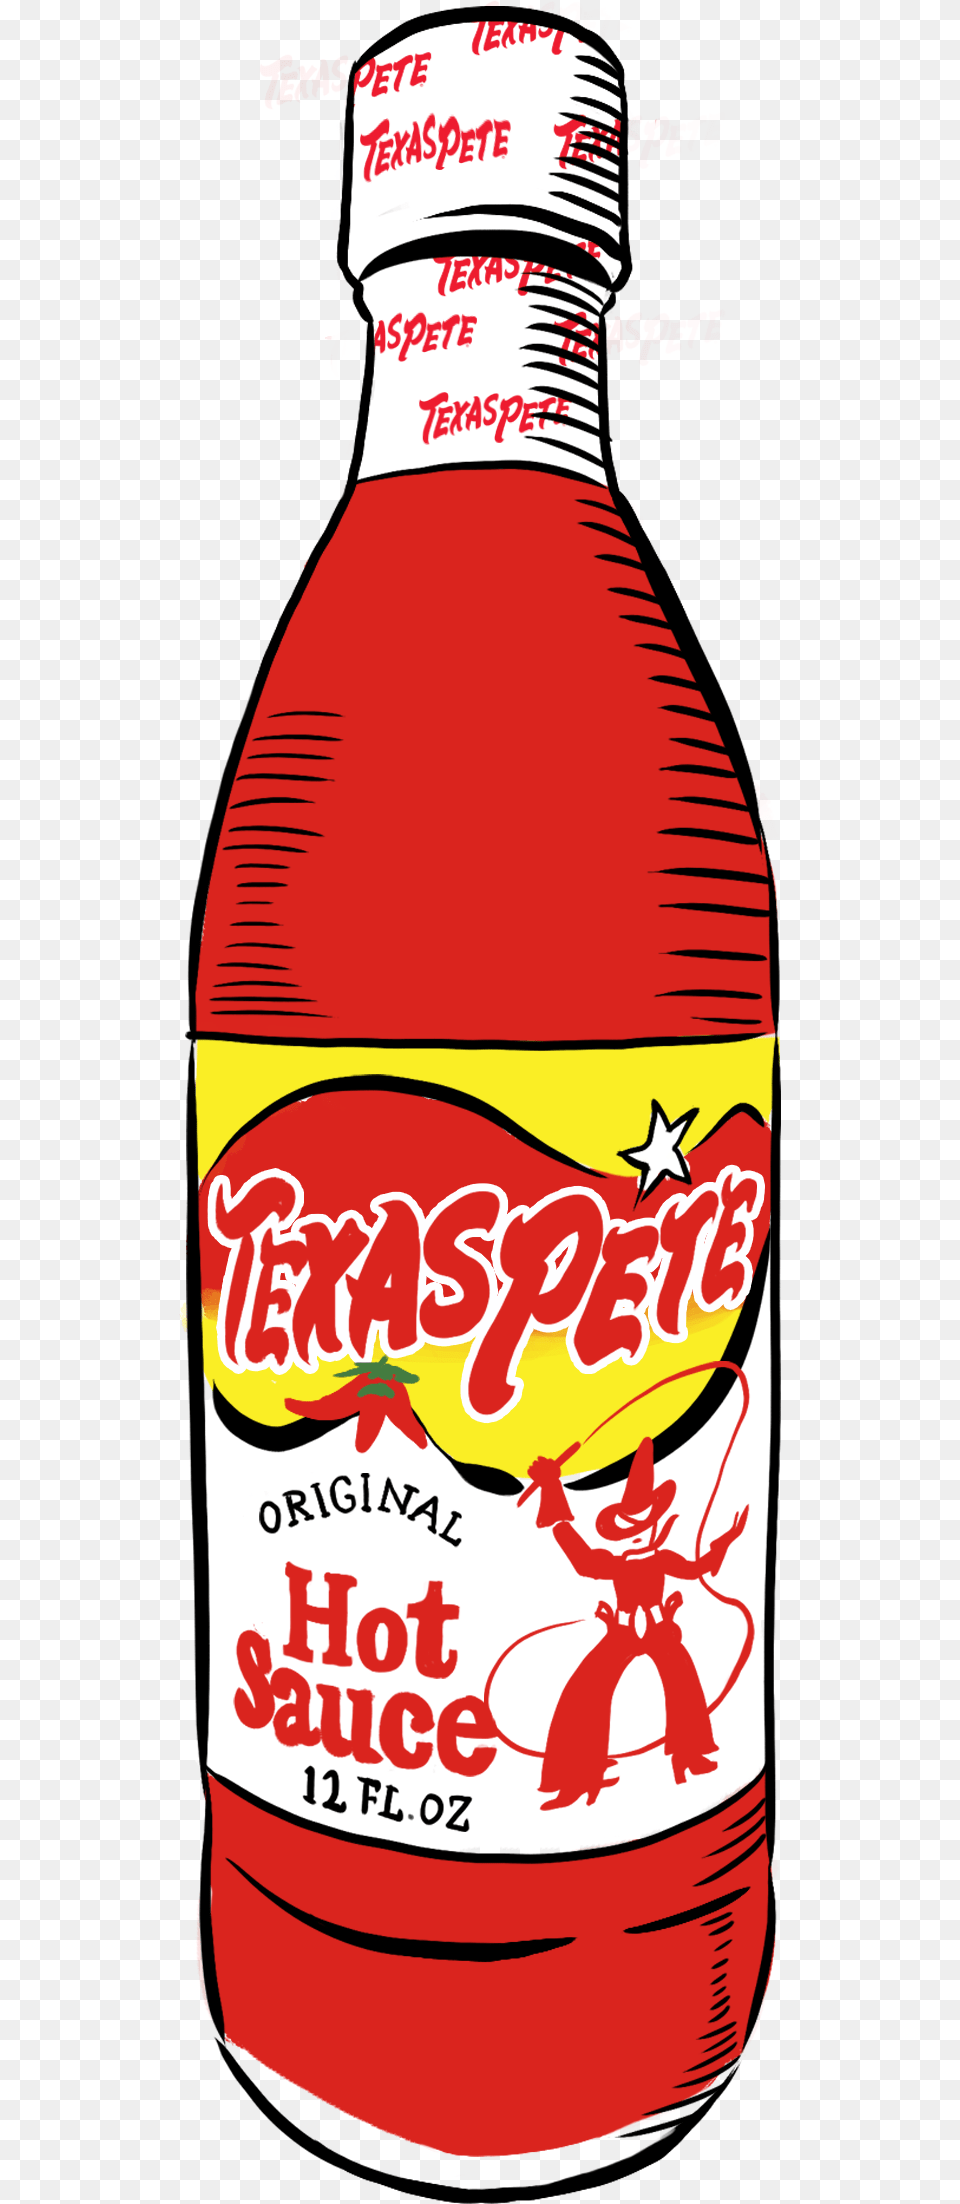 Illustration Of Hot Sauce Bottle By Texas Pete Shows T W Garner Food Co Texas Pete Seafood Cocktail Sauce, Ketchup, Baby, Person, Alcohol Png